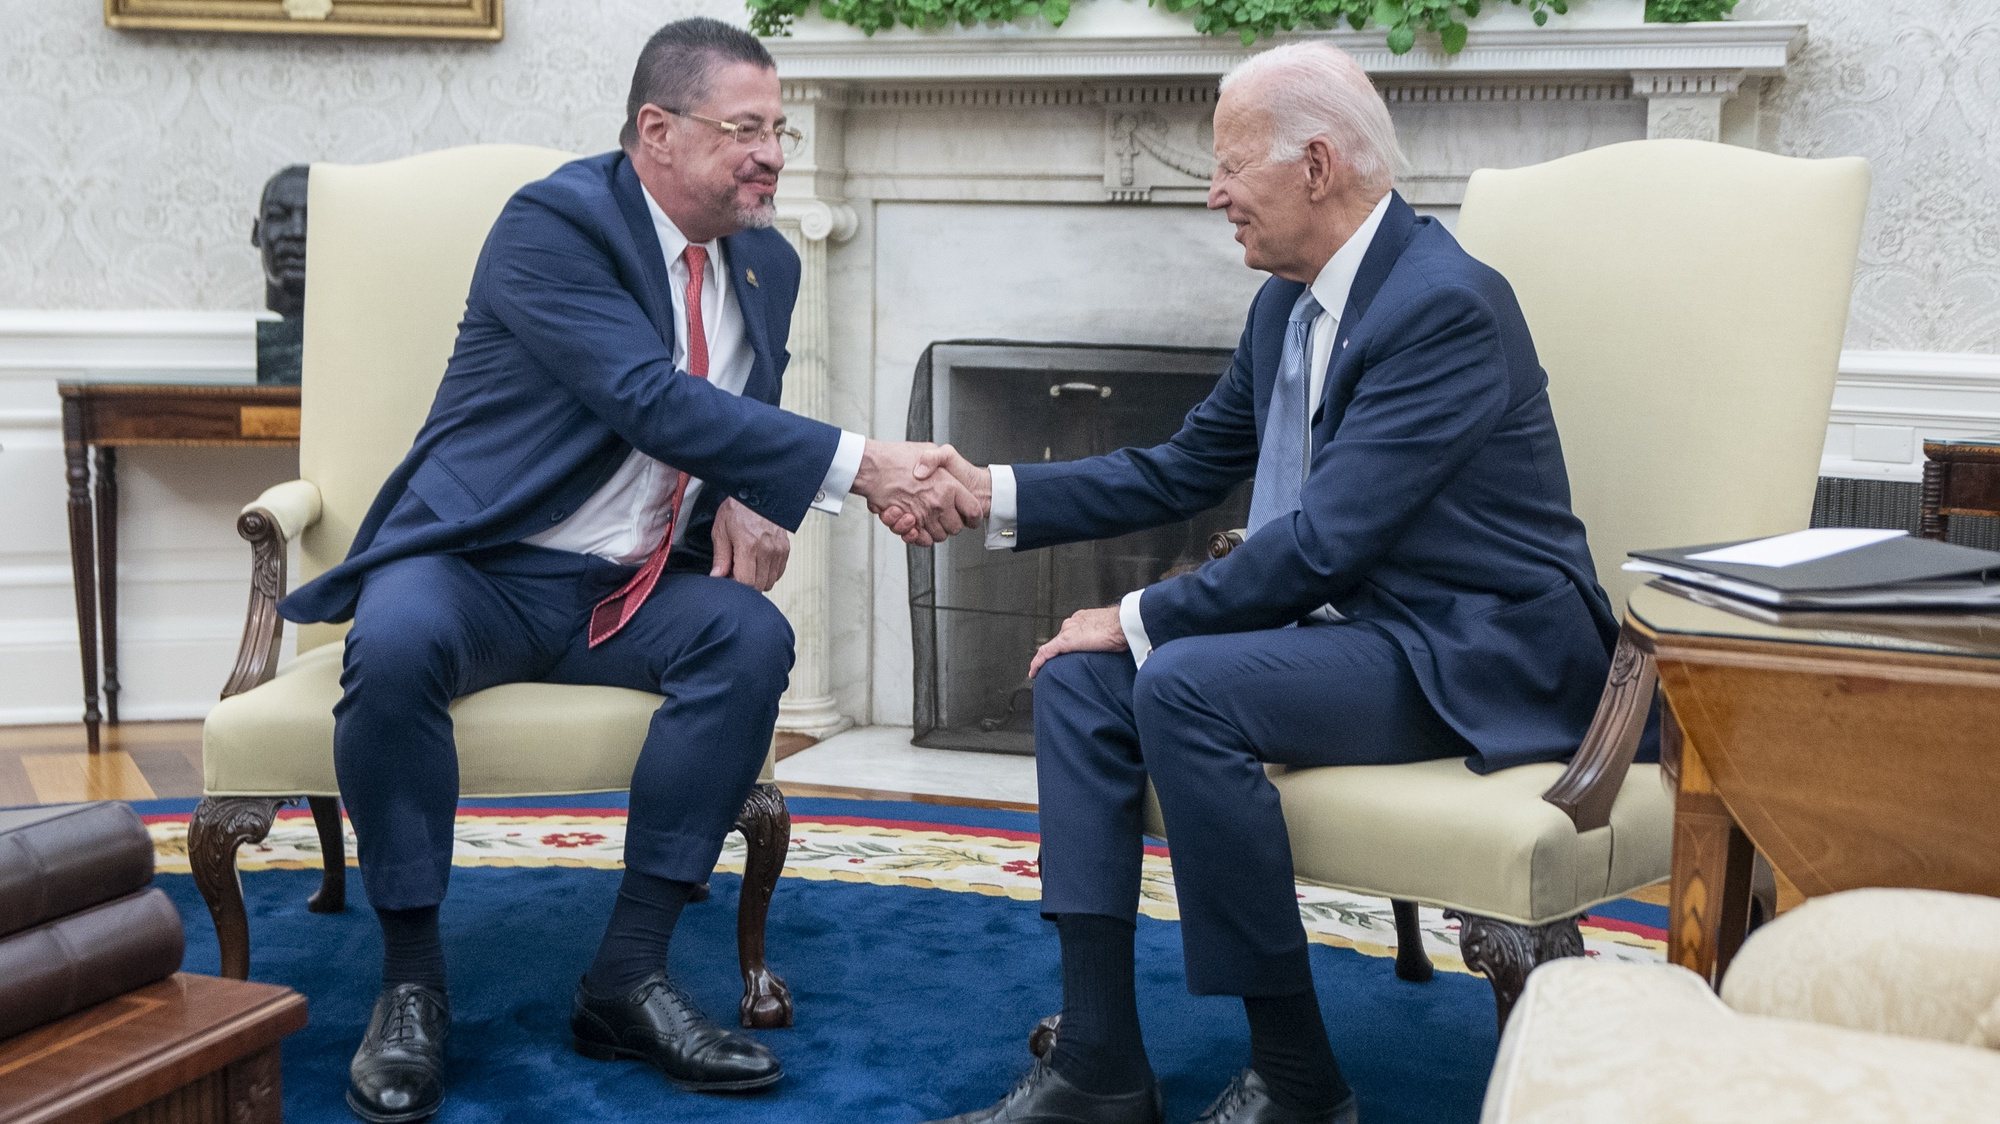 epa10827552 US President Joe Biden shakes hands with Costa Rican President Rodrigo Chaves Robles during a meeting in the Oval Office at the White House in Washington, DC, USA, 29 August 2023.  EPA/SHAWN THEW / POOL